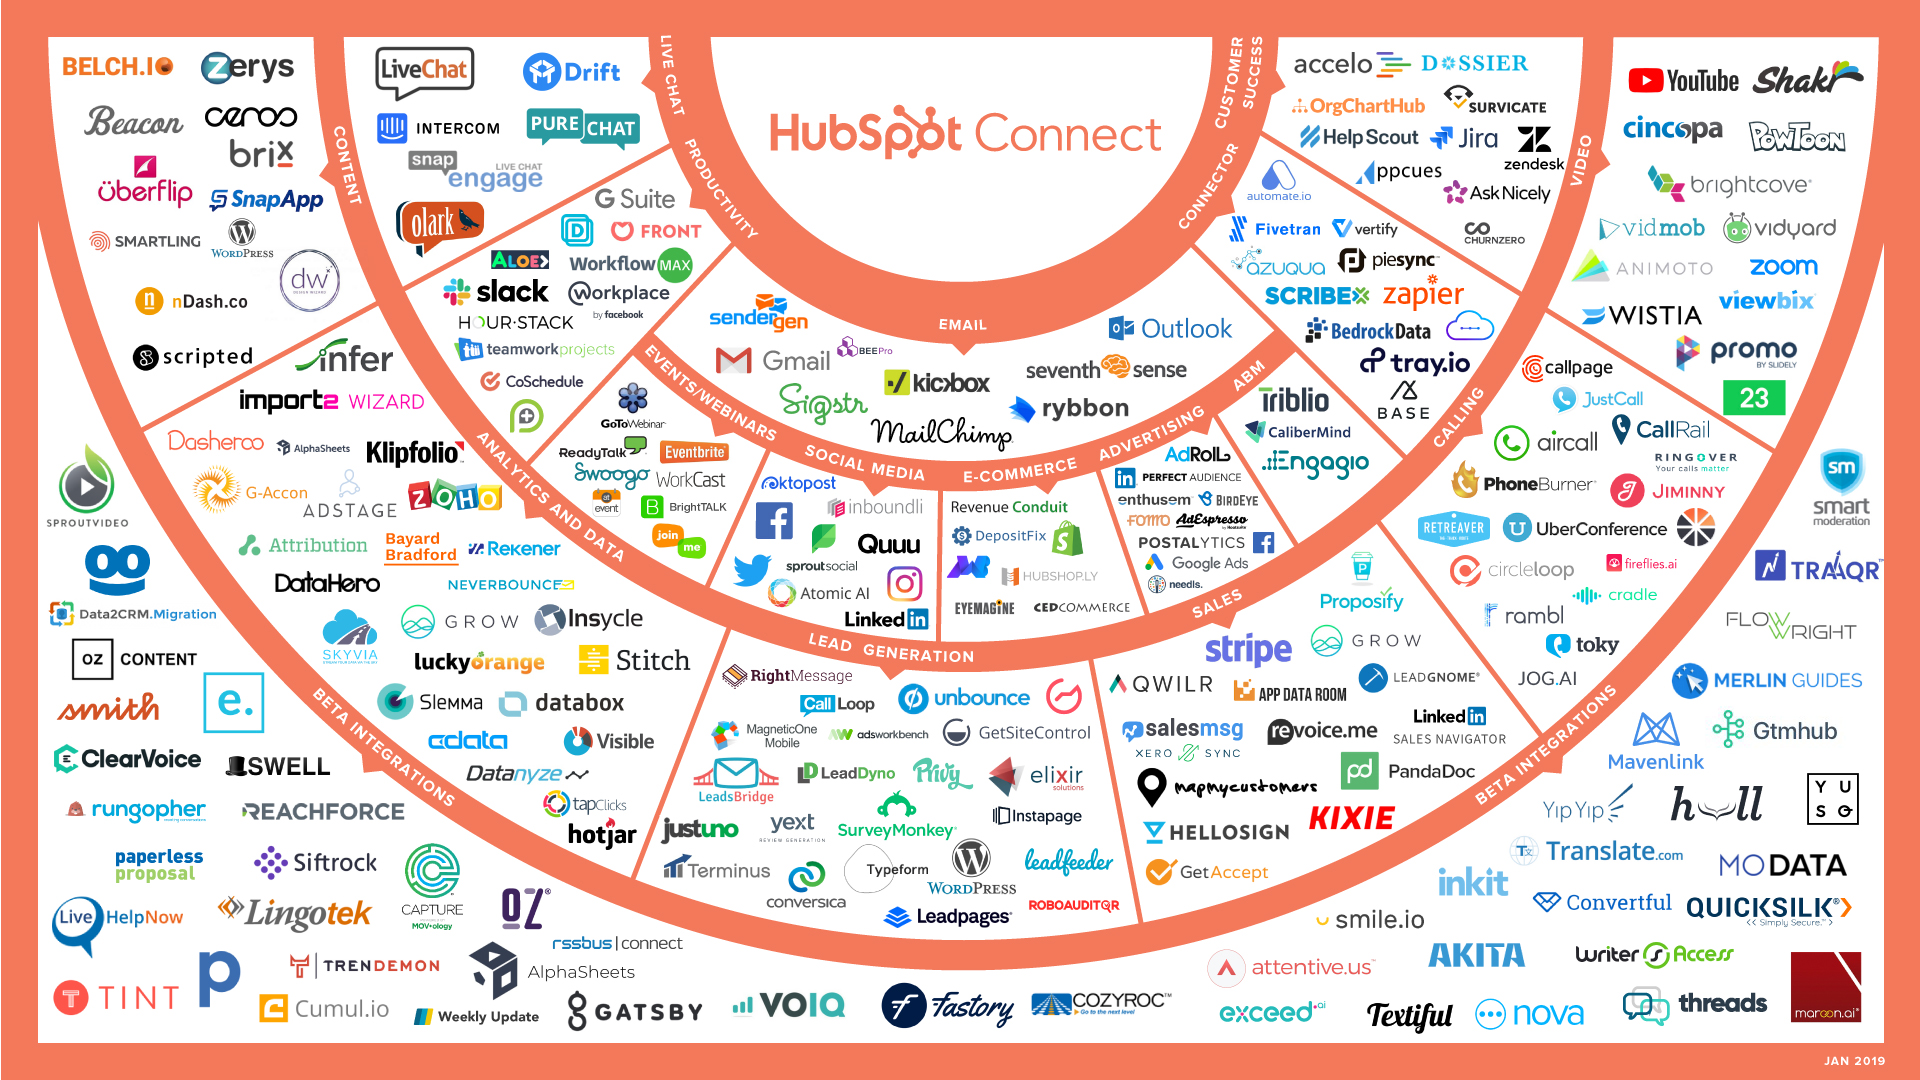 February 2019: New HubSpot Product Integrations This Month